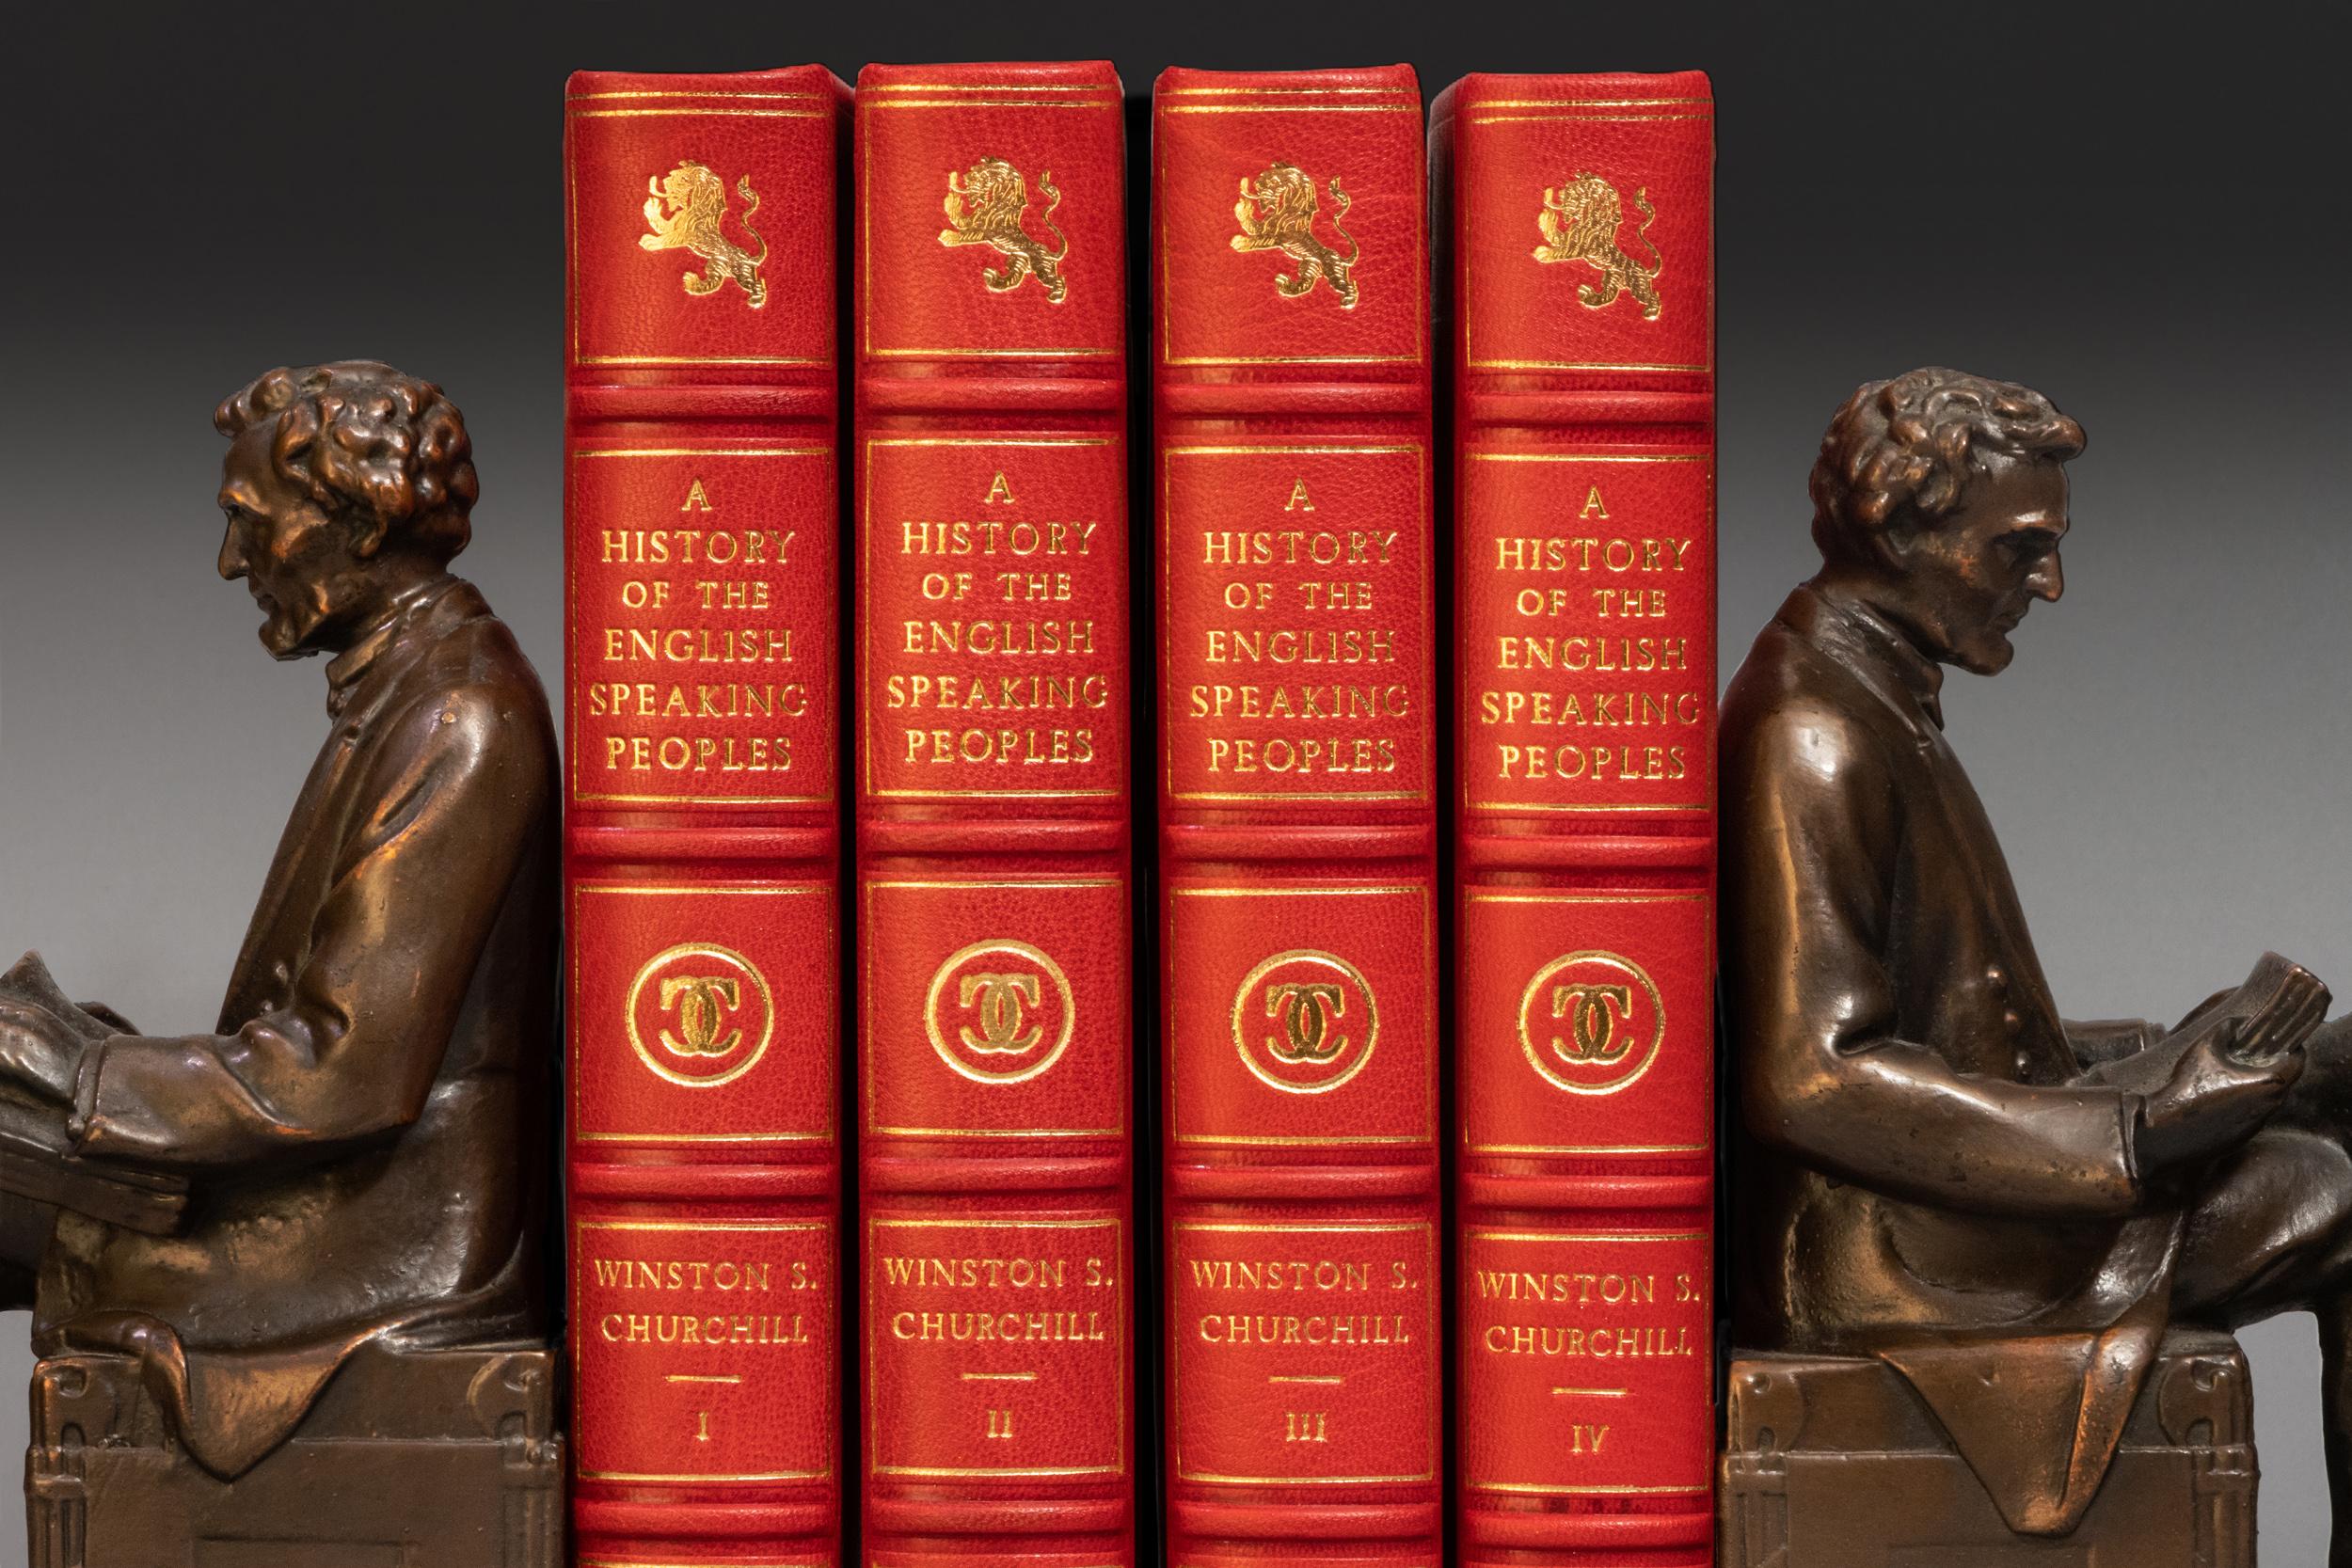 20th Century 4 Volumes. Sir Winston S. Churchill, A History of the English Speaking Peoples